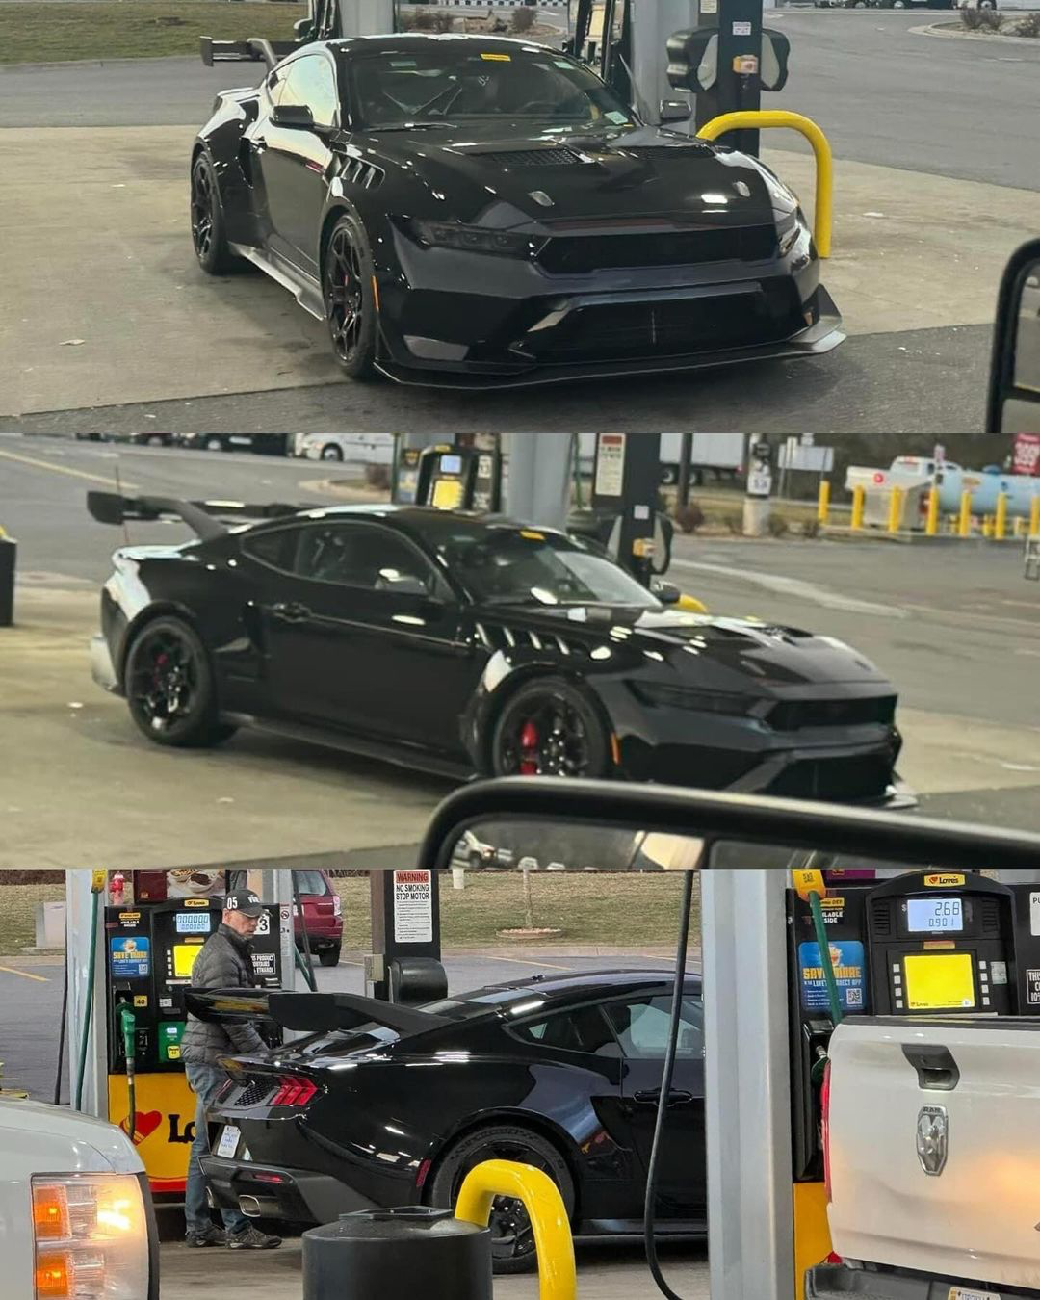 S650 Mustang Black Mustang GTD Spied at Public Gas Station mustang-gtd-spied-gas-station-1